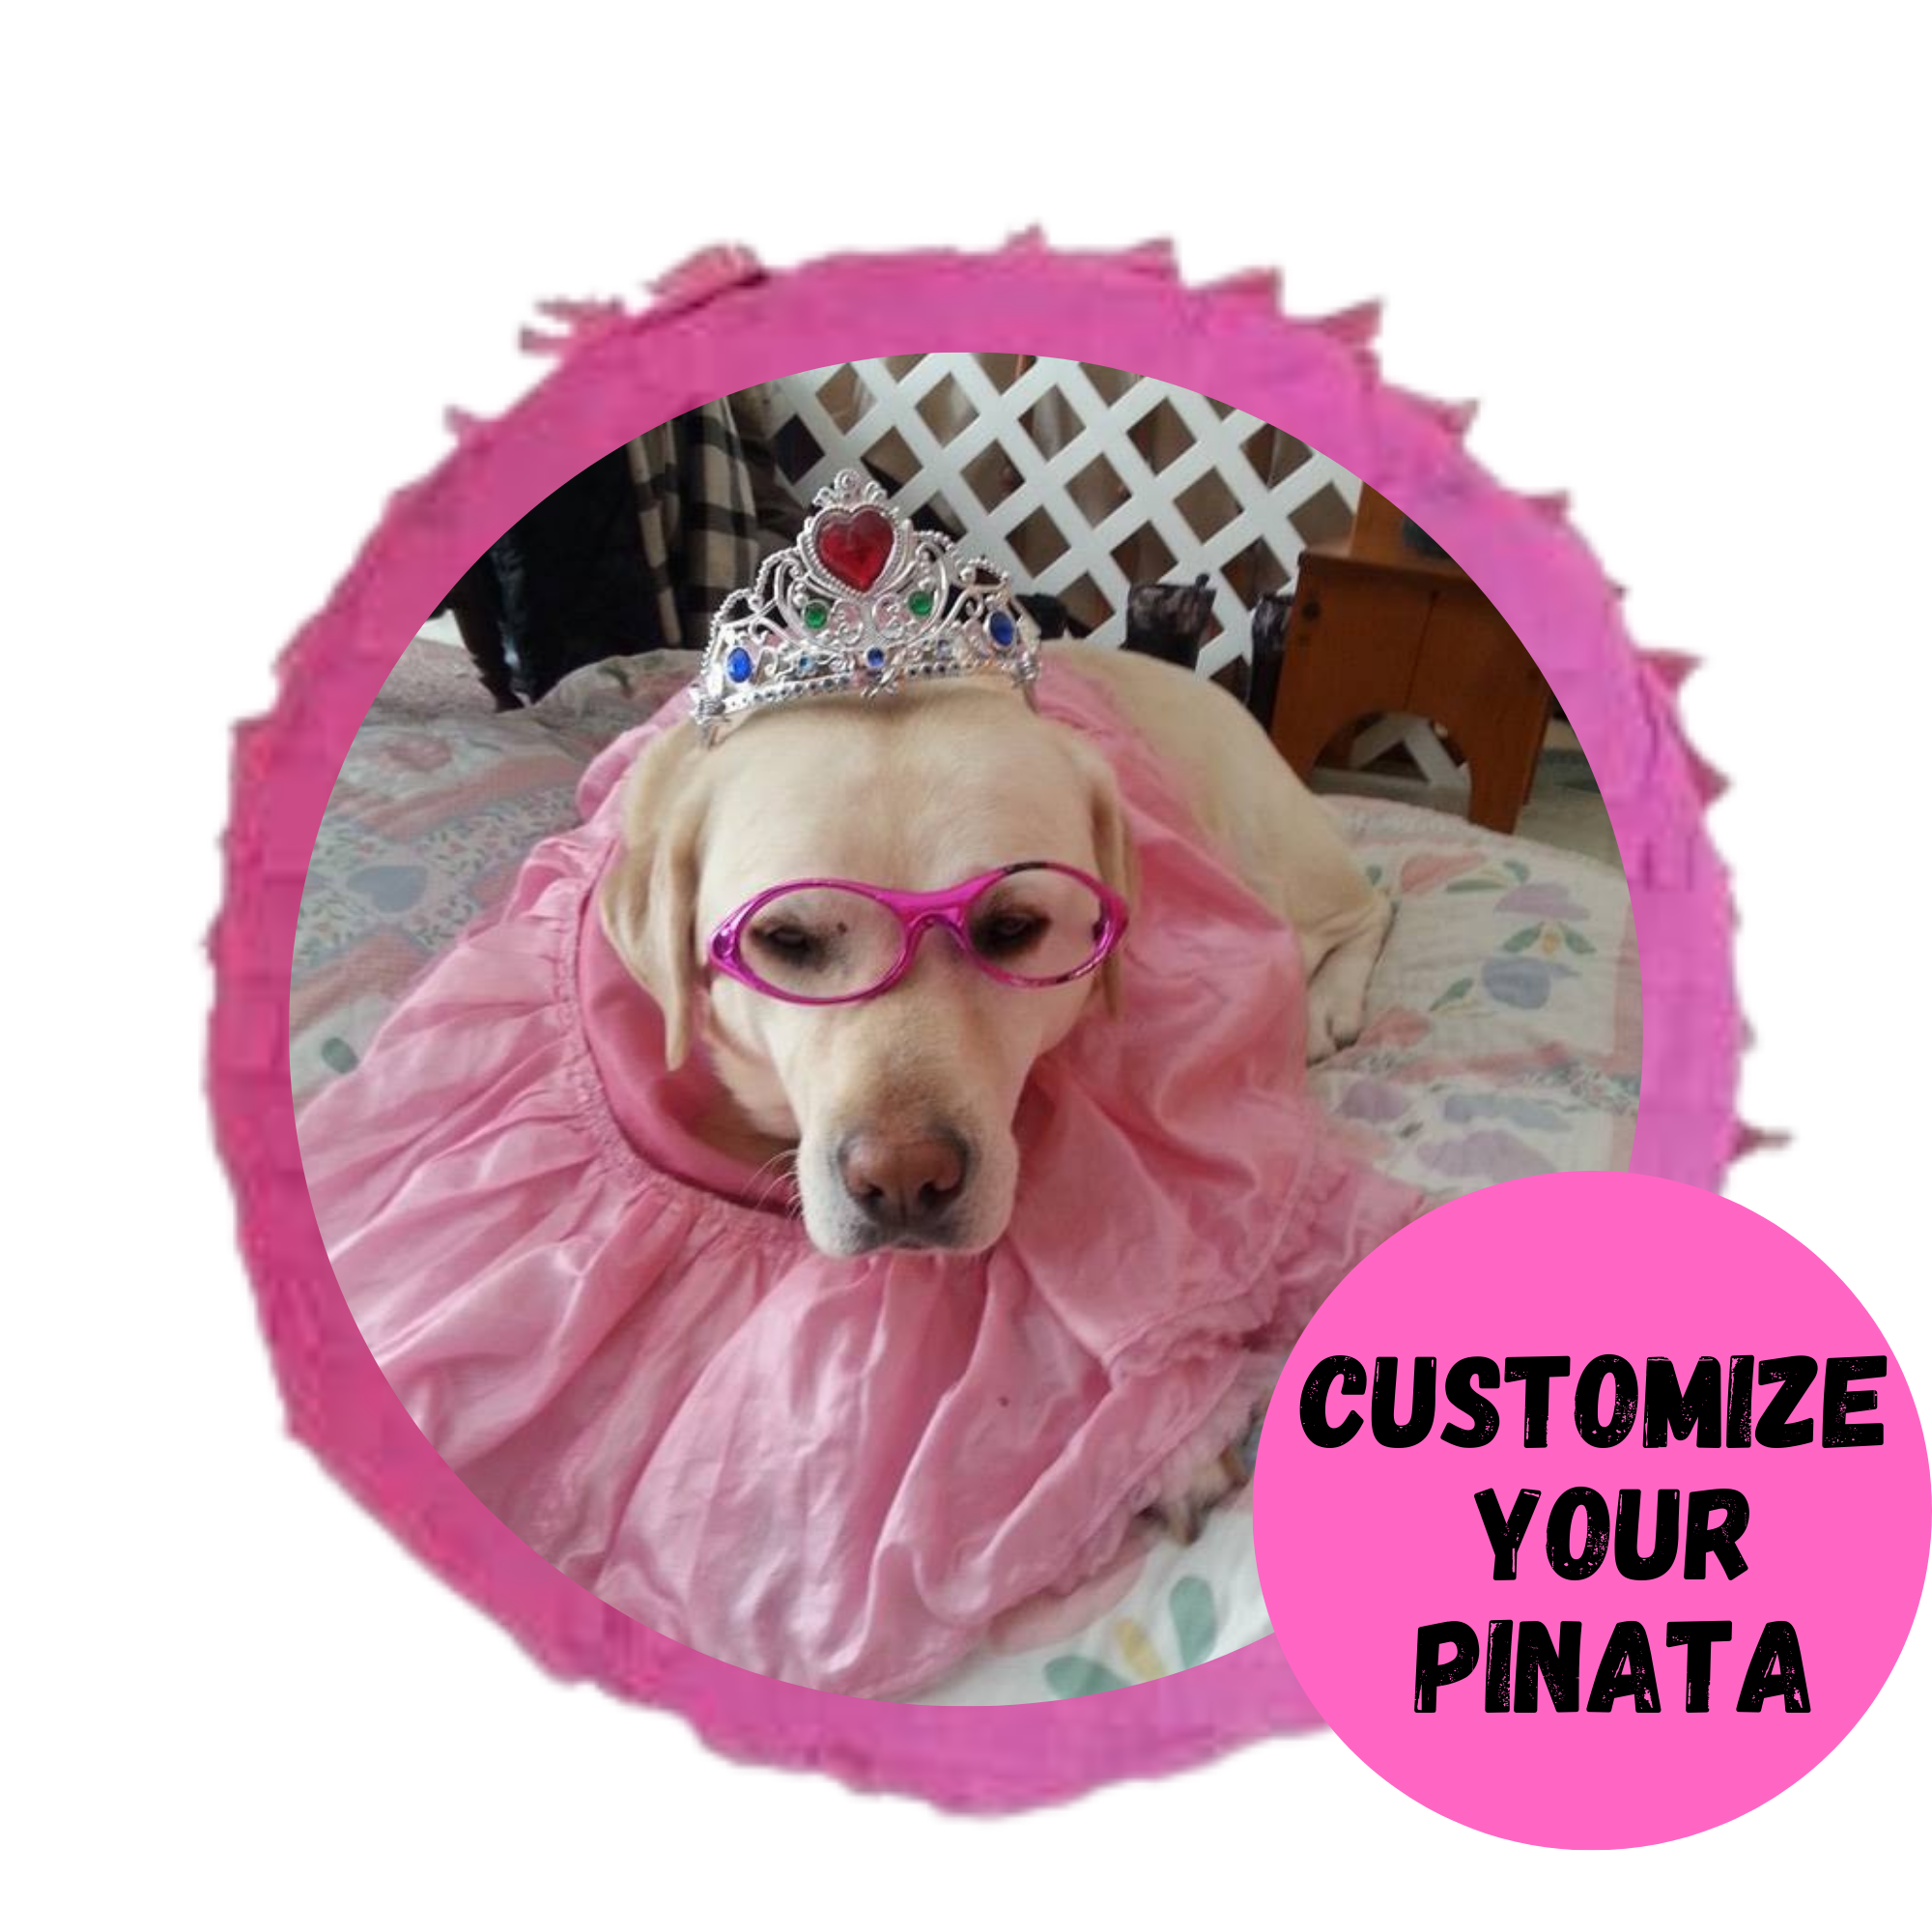 Custom Pinatas - Pick Your Own Image - POPPartyballoons